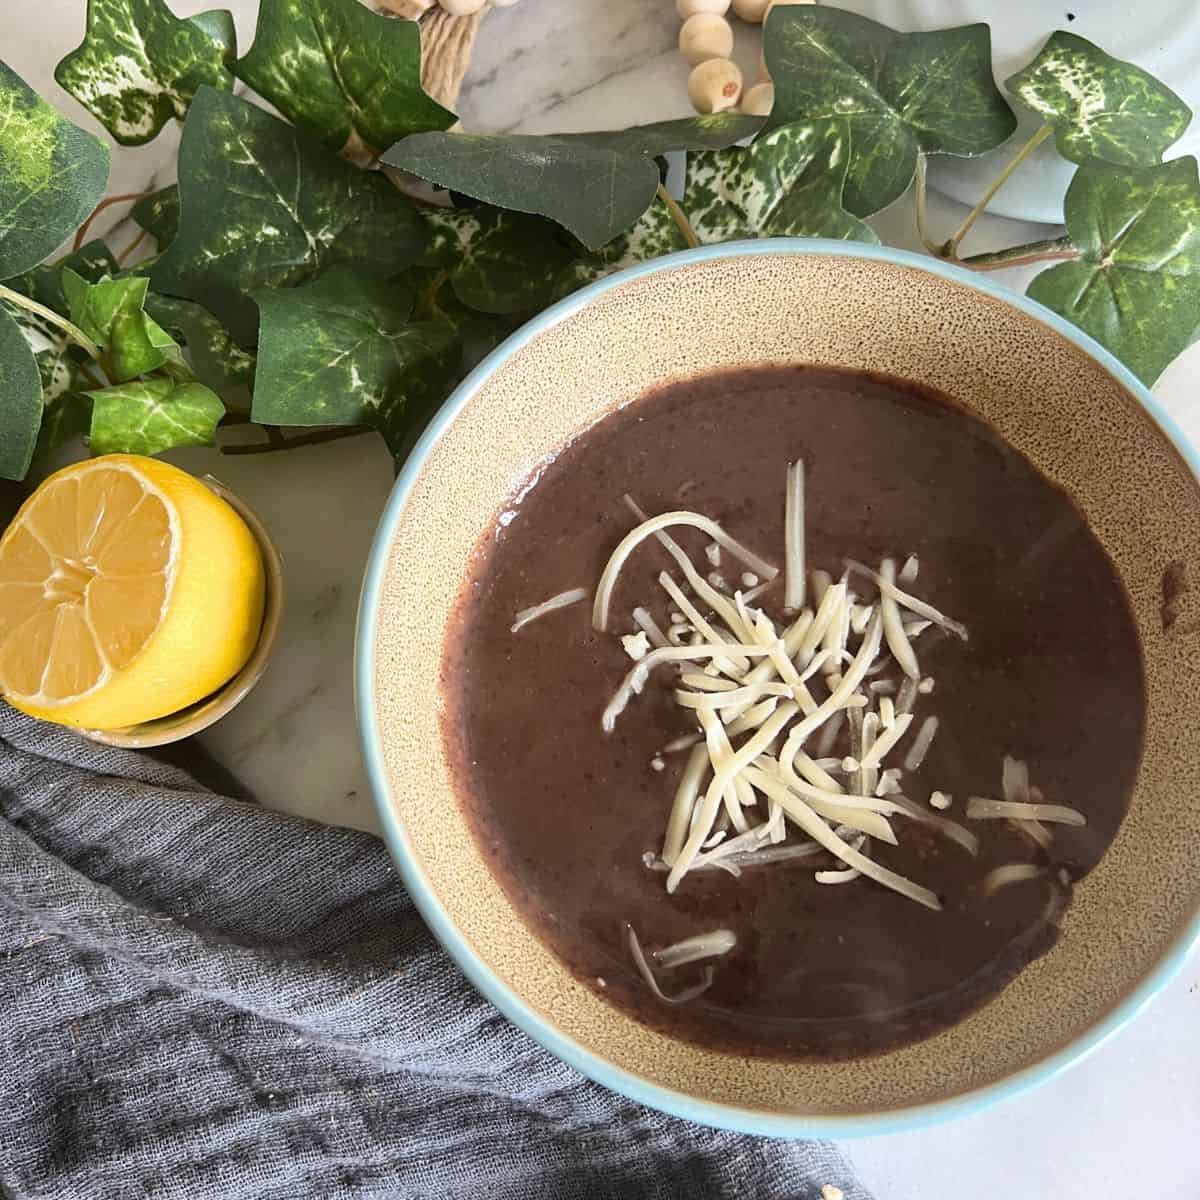 Hearty and spicy Black Bean soup that tastes just like Panera Bread. 0 Weight Watchers points. 